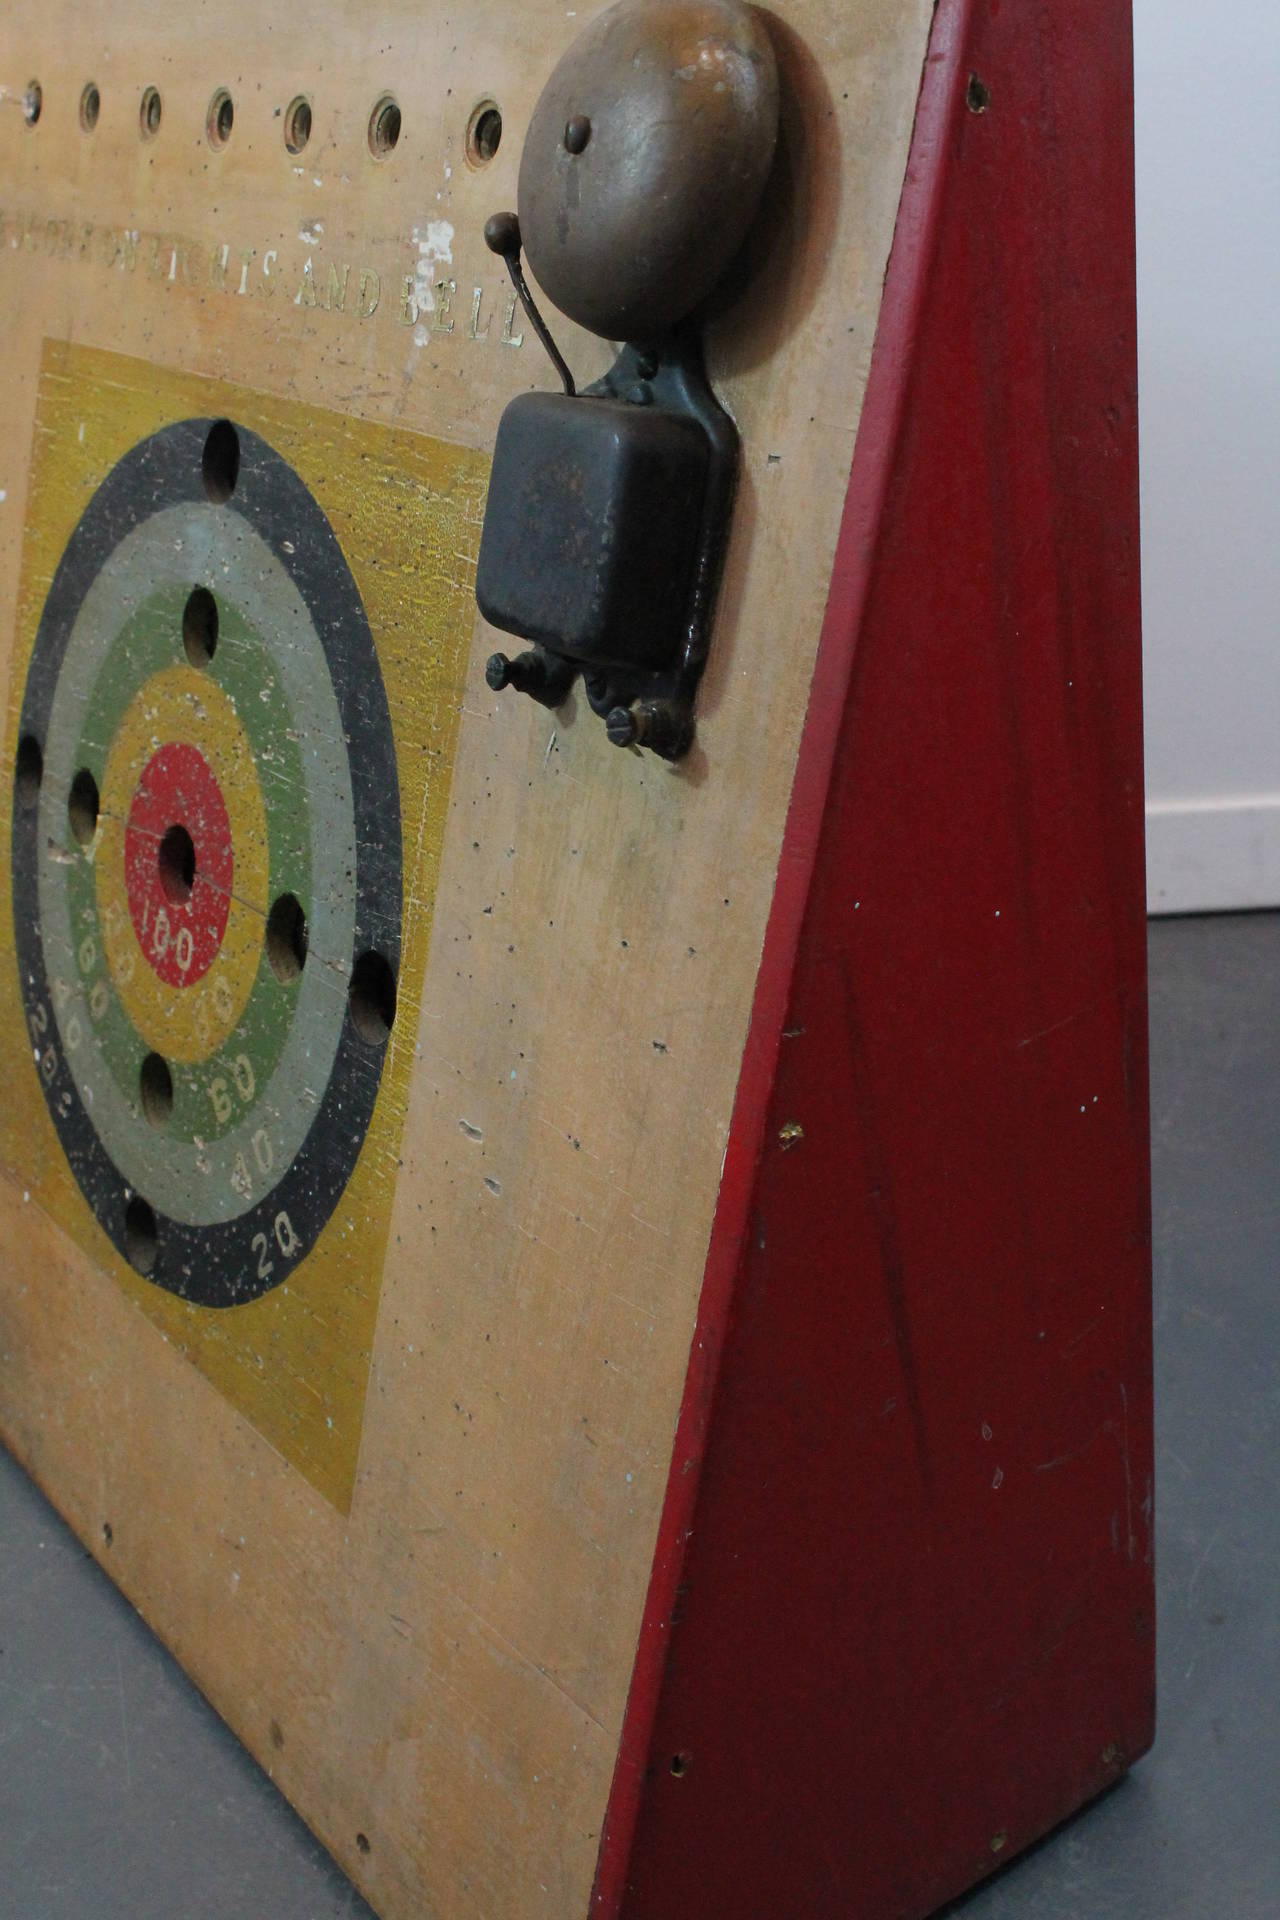 Prototype Handmade Table-Top Electrified Dartboard with Bell, 1930s-1940s For Sale 2